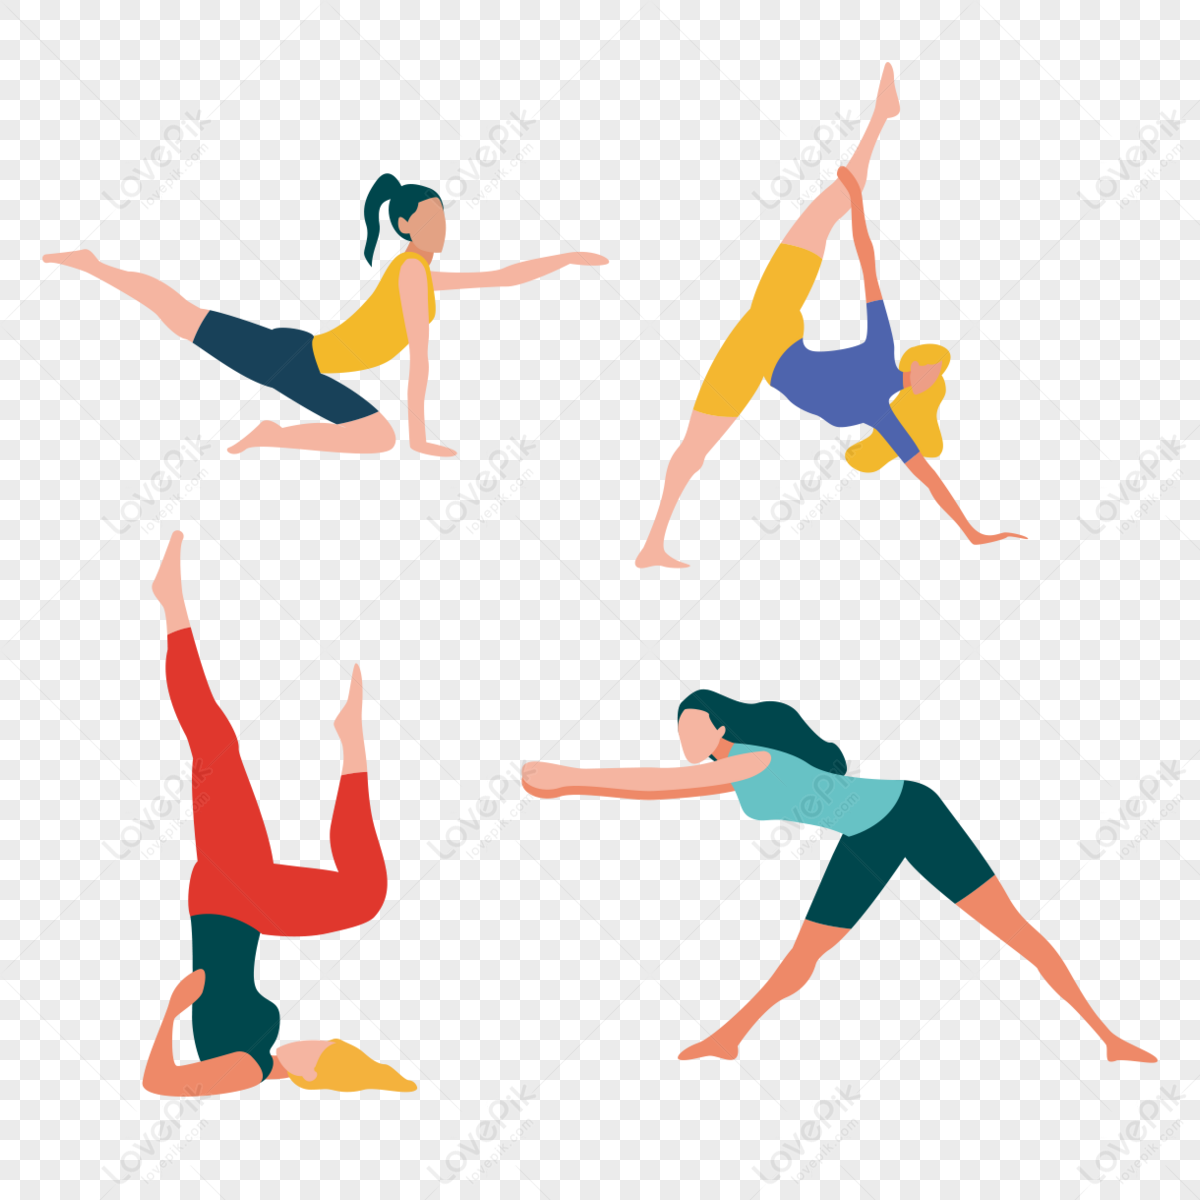 Yoga Background Wallpaper Image For Free Download - Pngtree  ร่างกาย,  พื้นหลัง, สุขภาพ